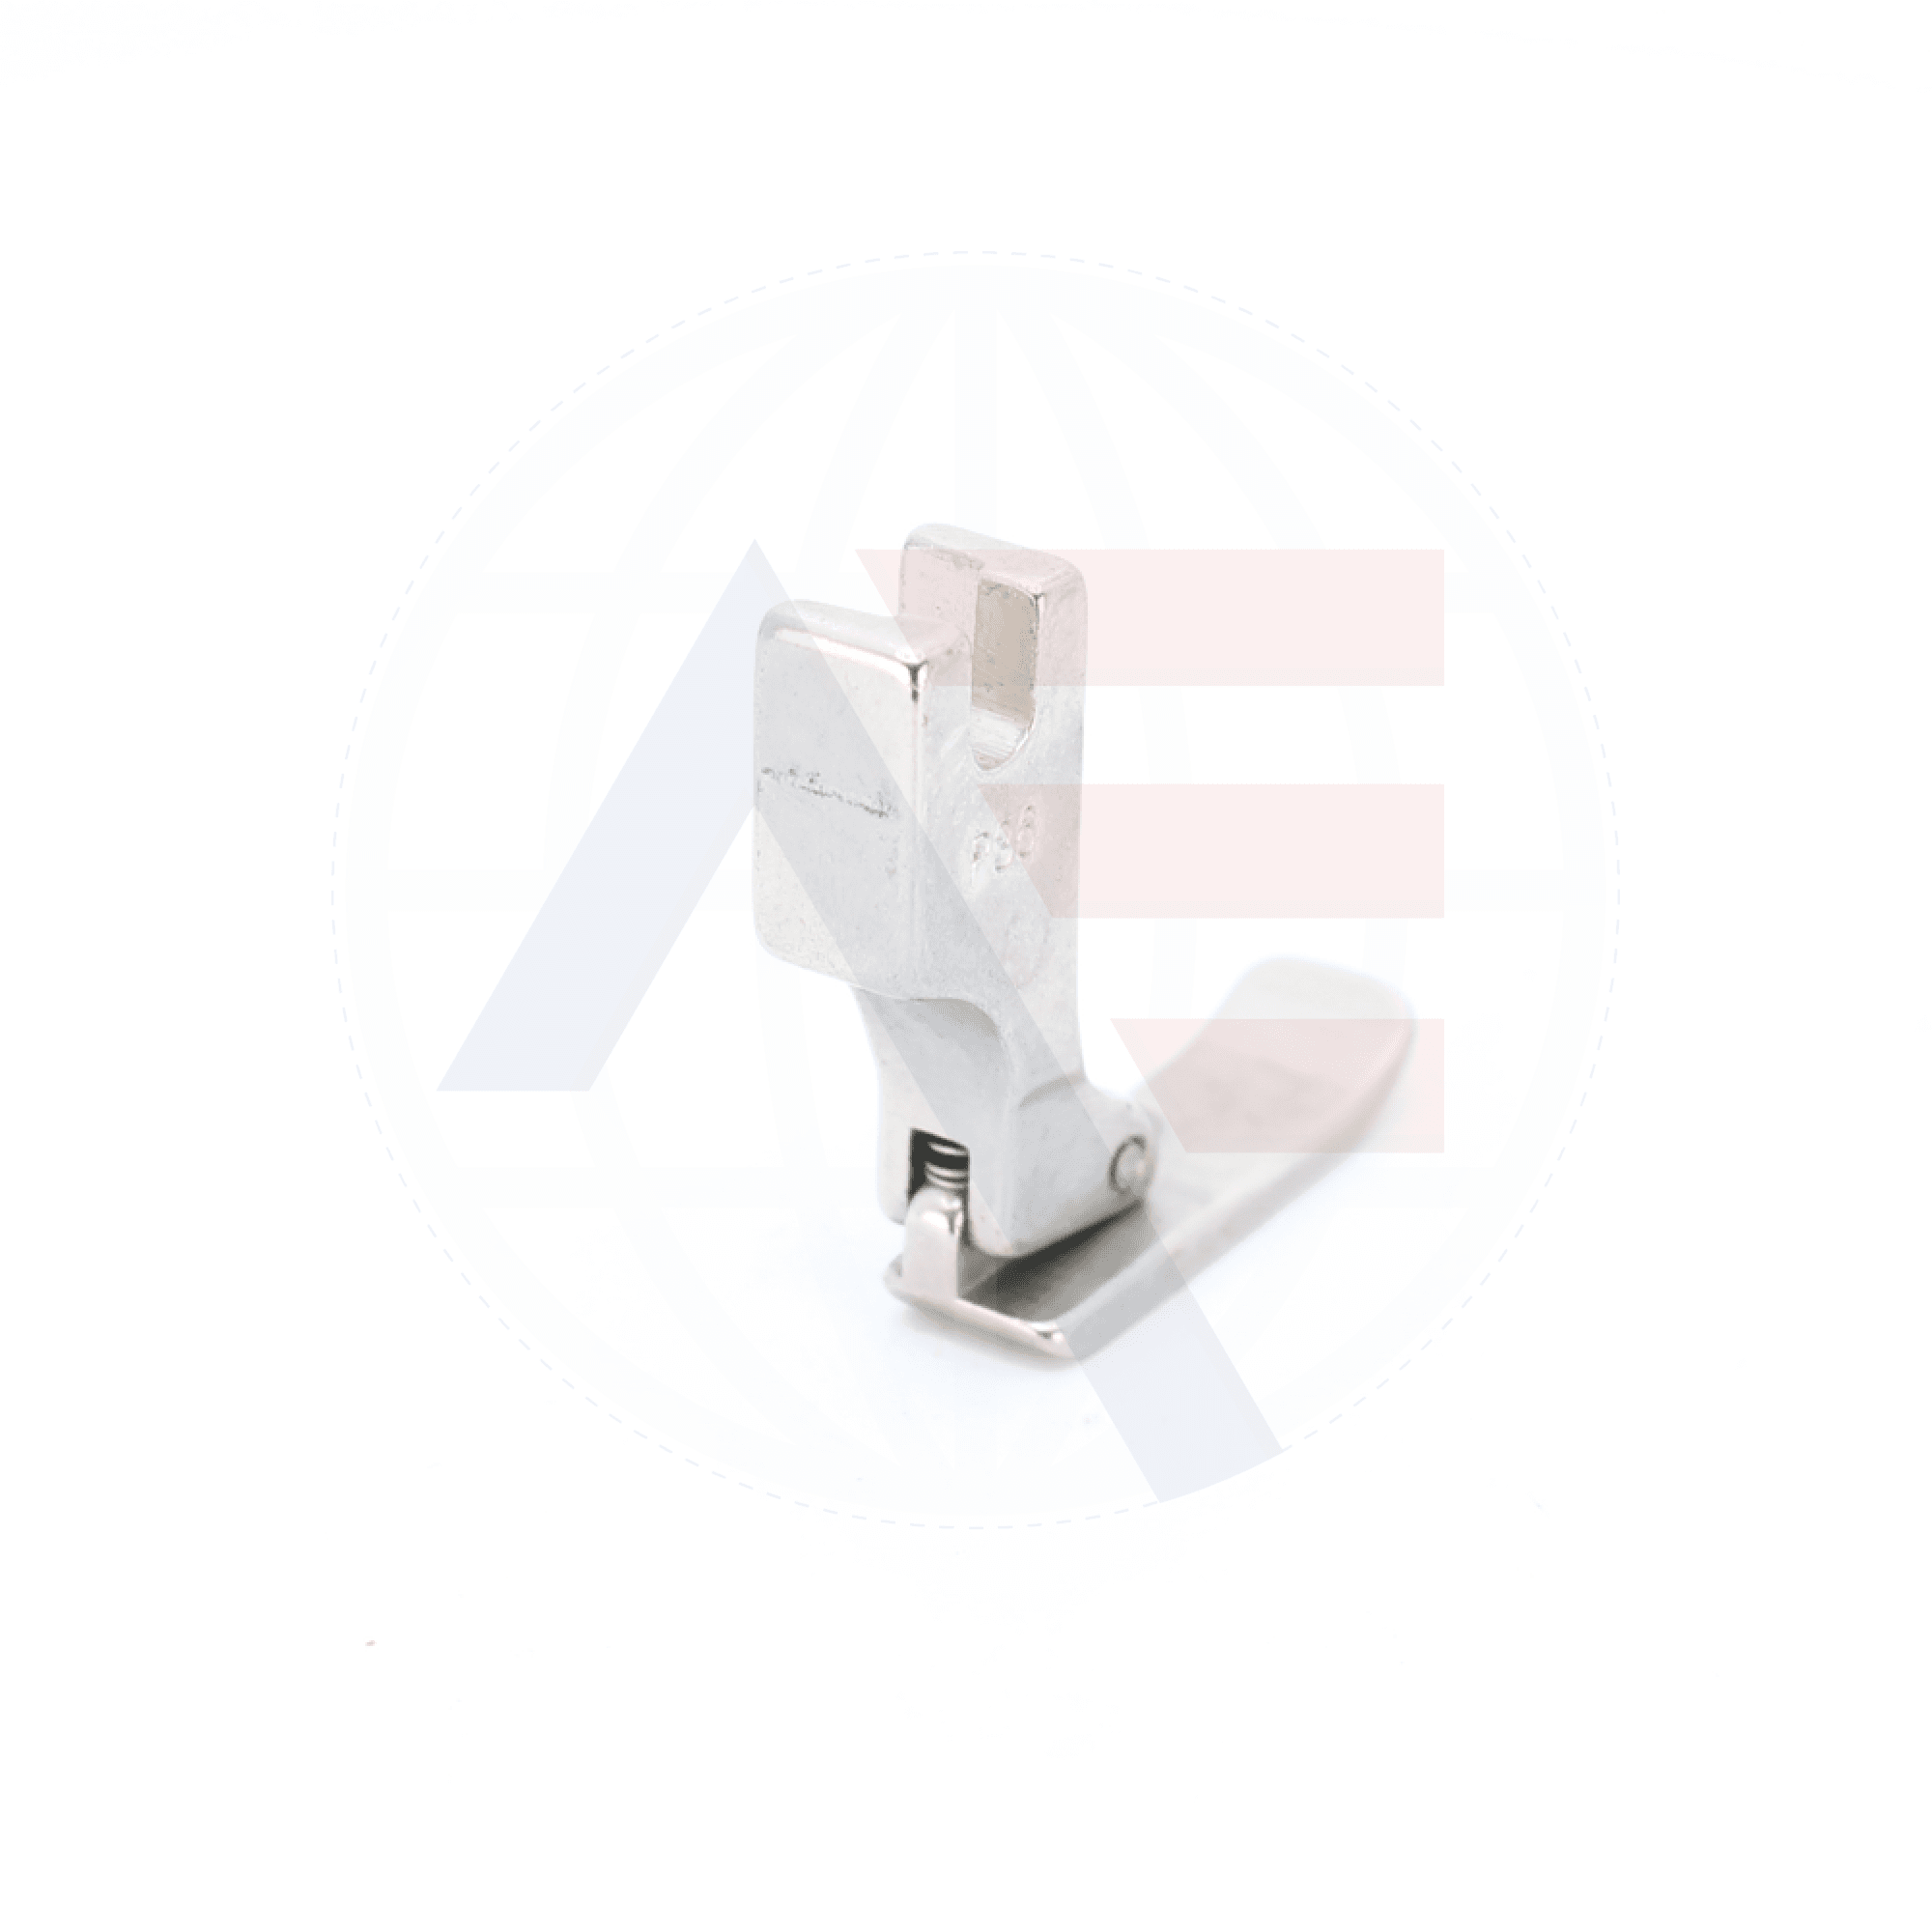 P36W Cording Foot Sewing Machine Spare Parts